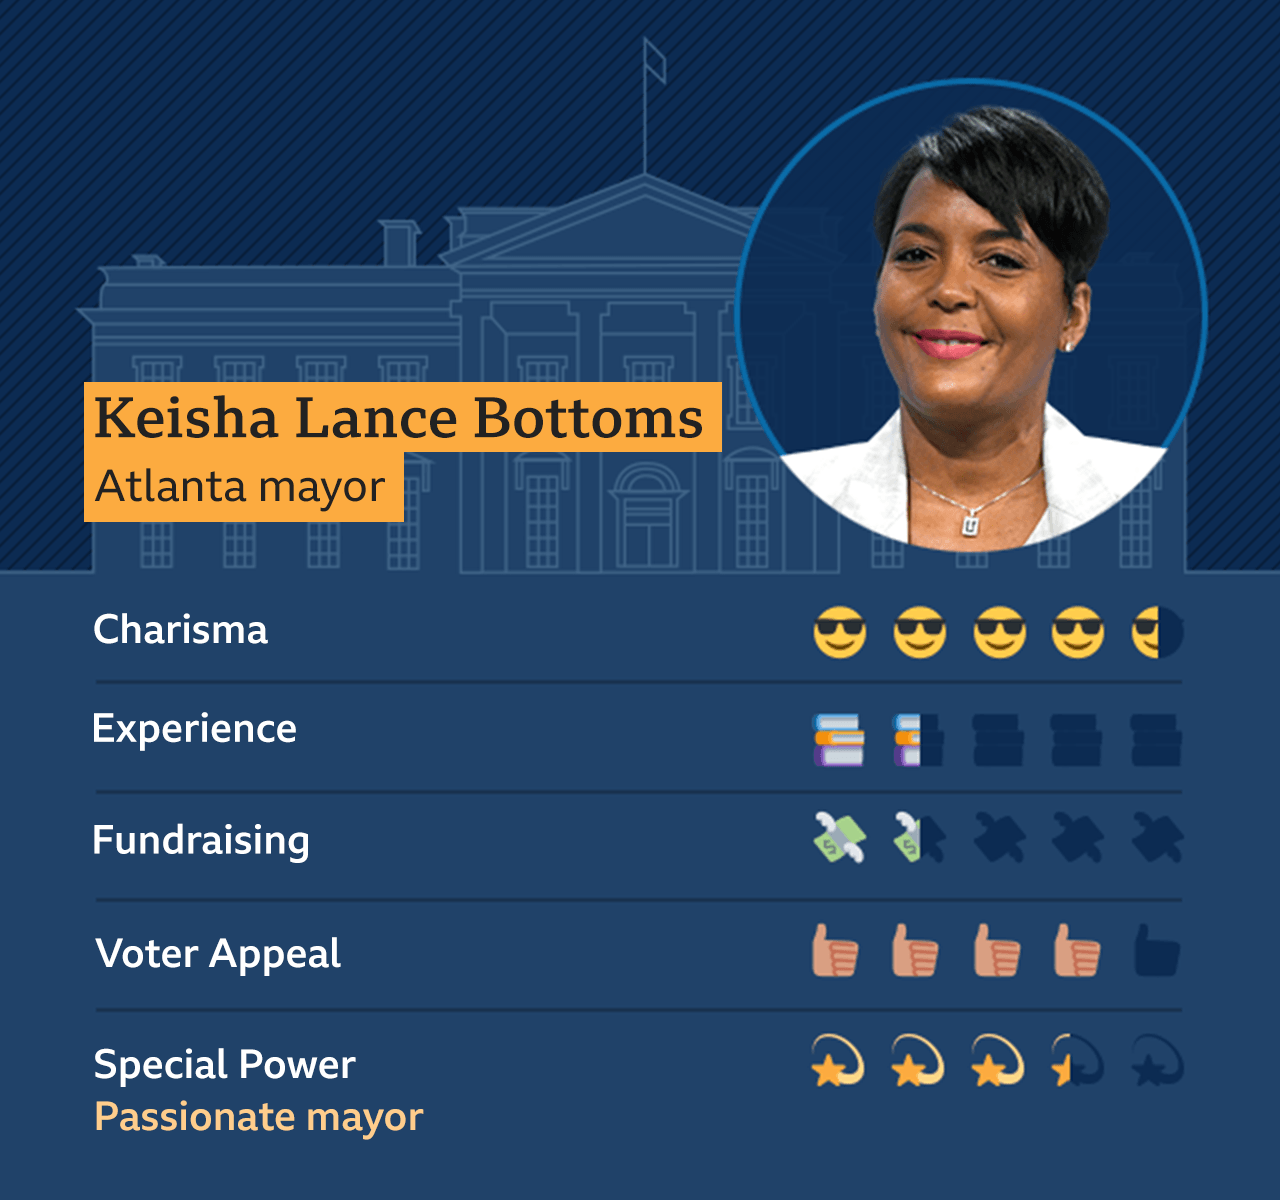 Graphic of Keisha Lance Bottoms, Atlanta Mayor: Charisma - 4.5, Experience 1.5, Fundraising - 1.5, Voter appeal - 4, Special Power - Passionate Mayor - 3.5